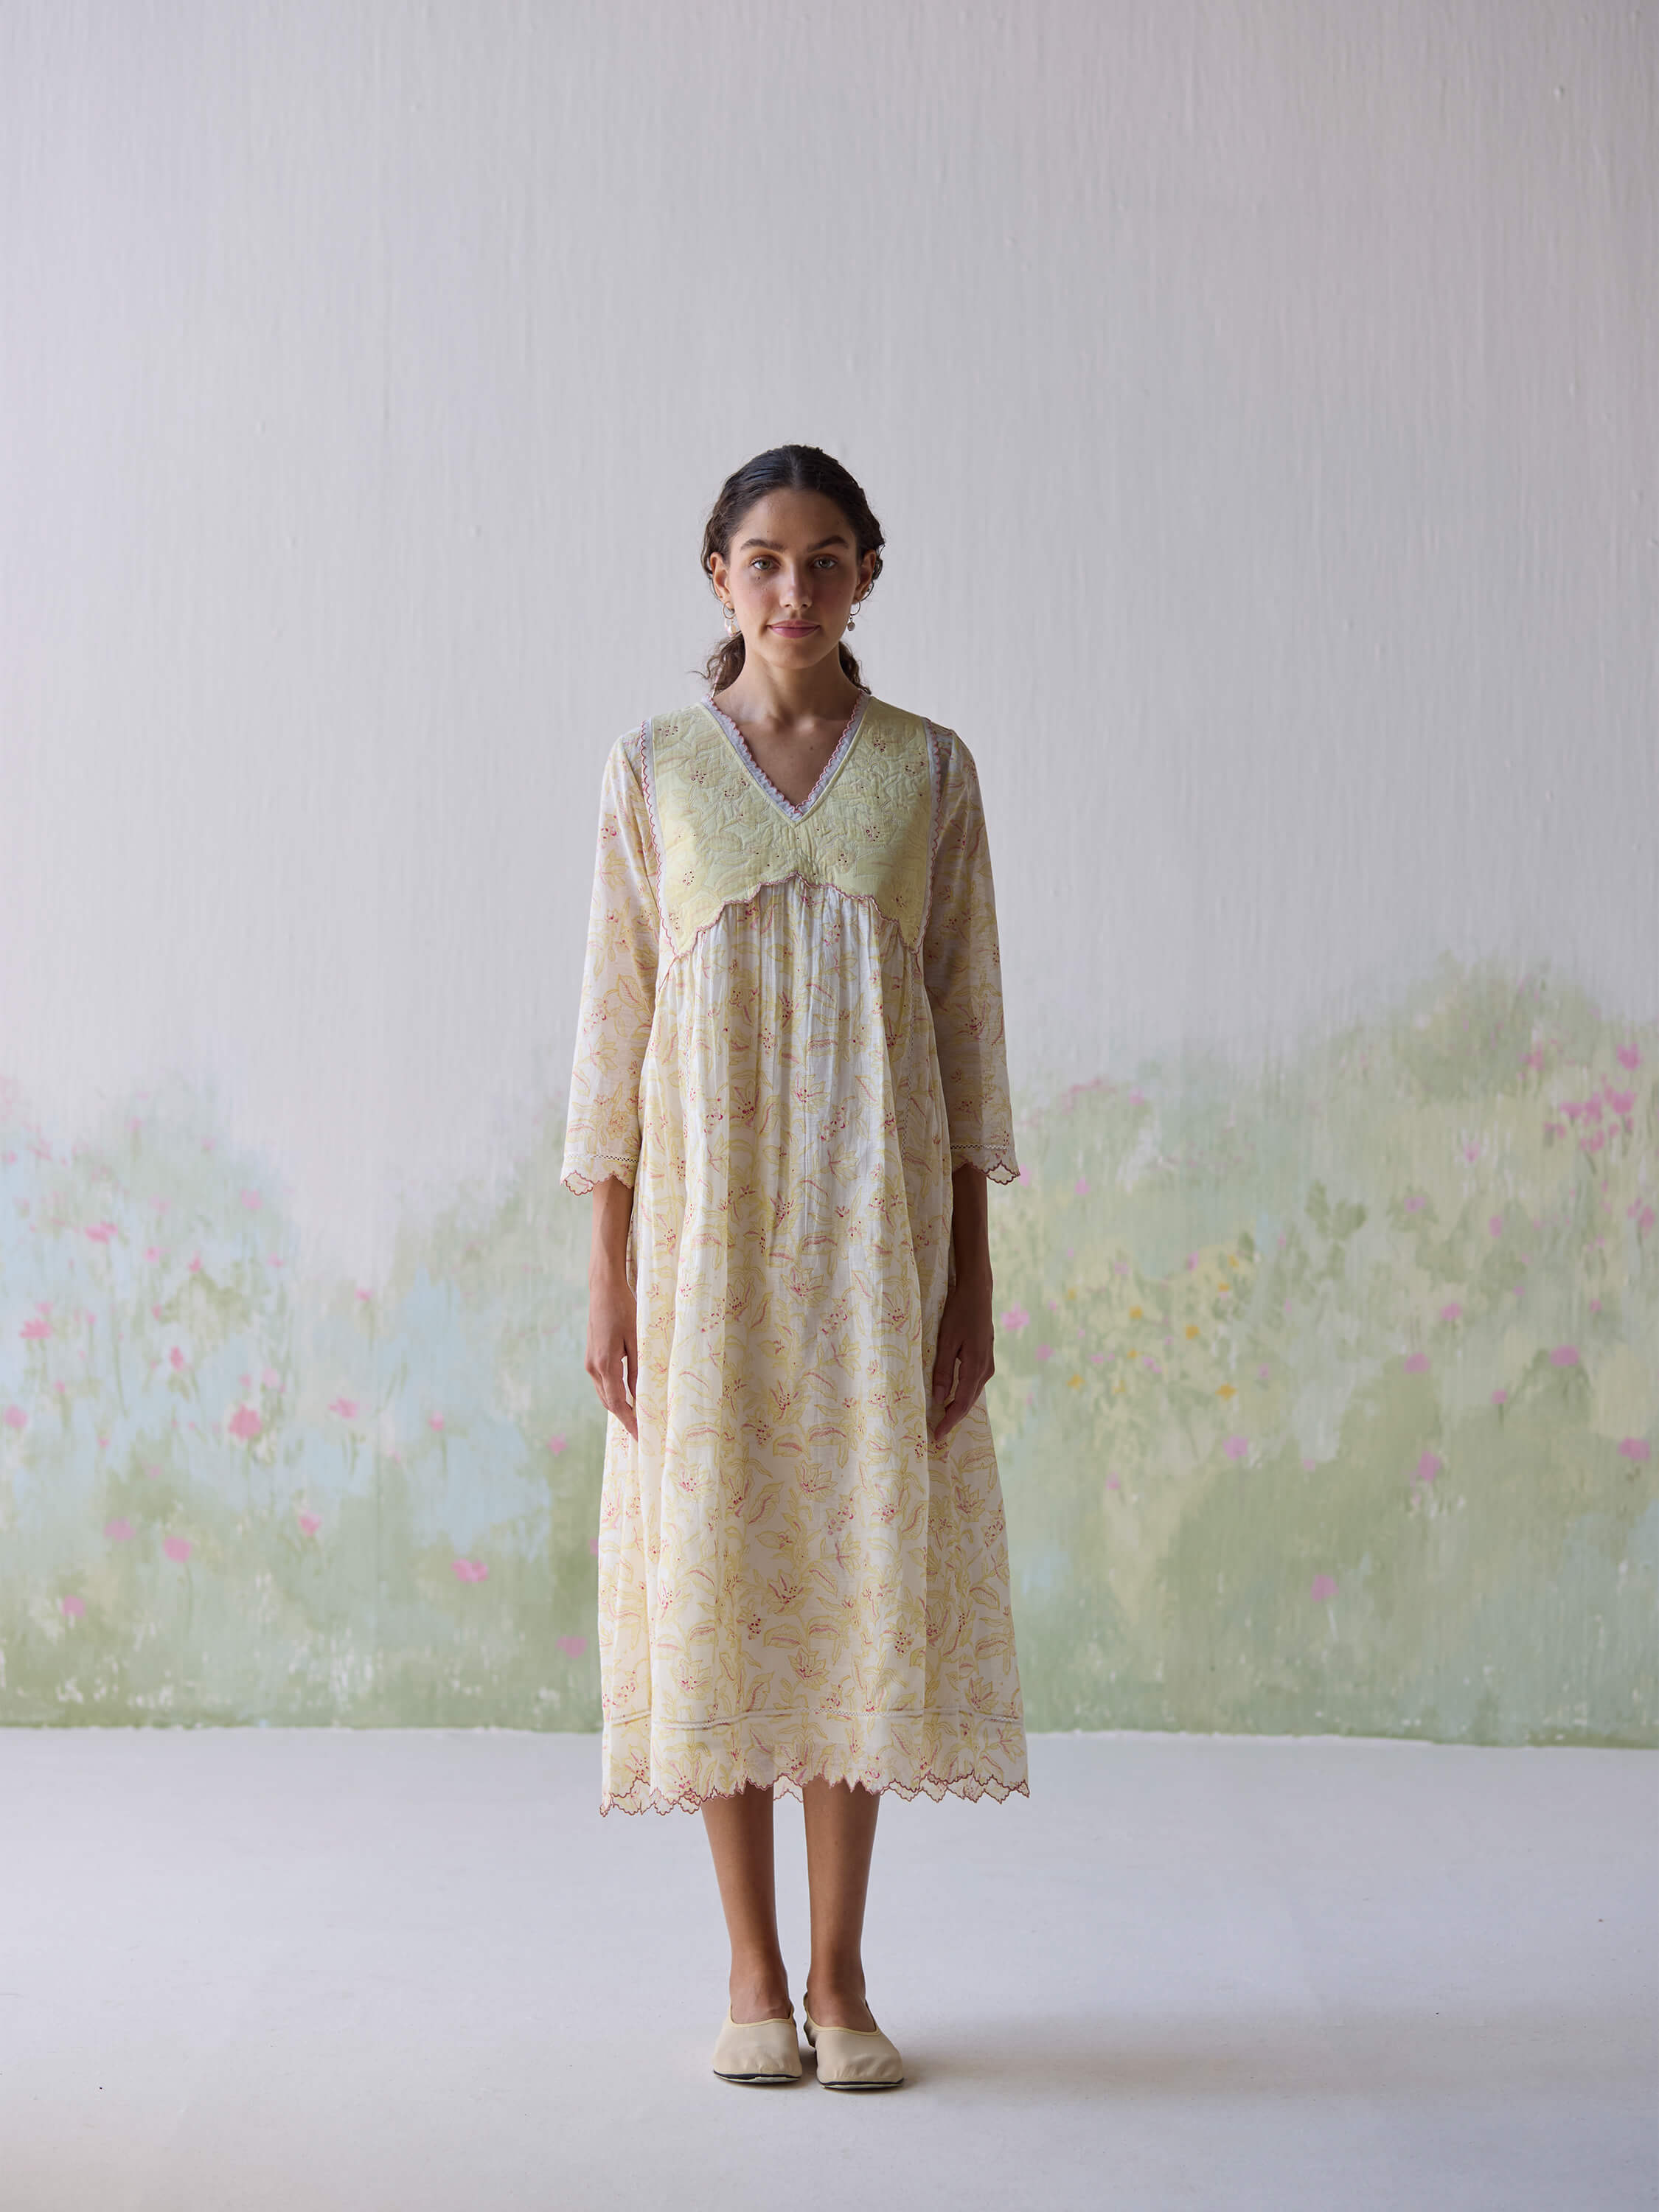 Woman in floral pastel dress standing against a minimalistic background.